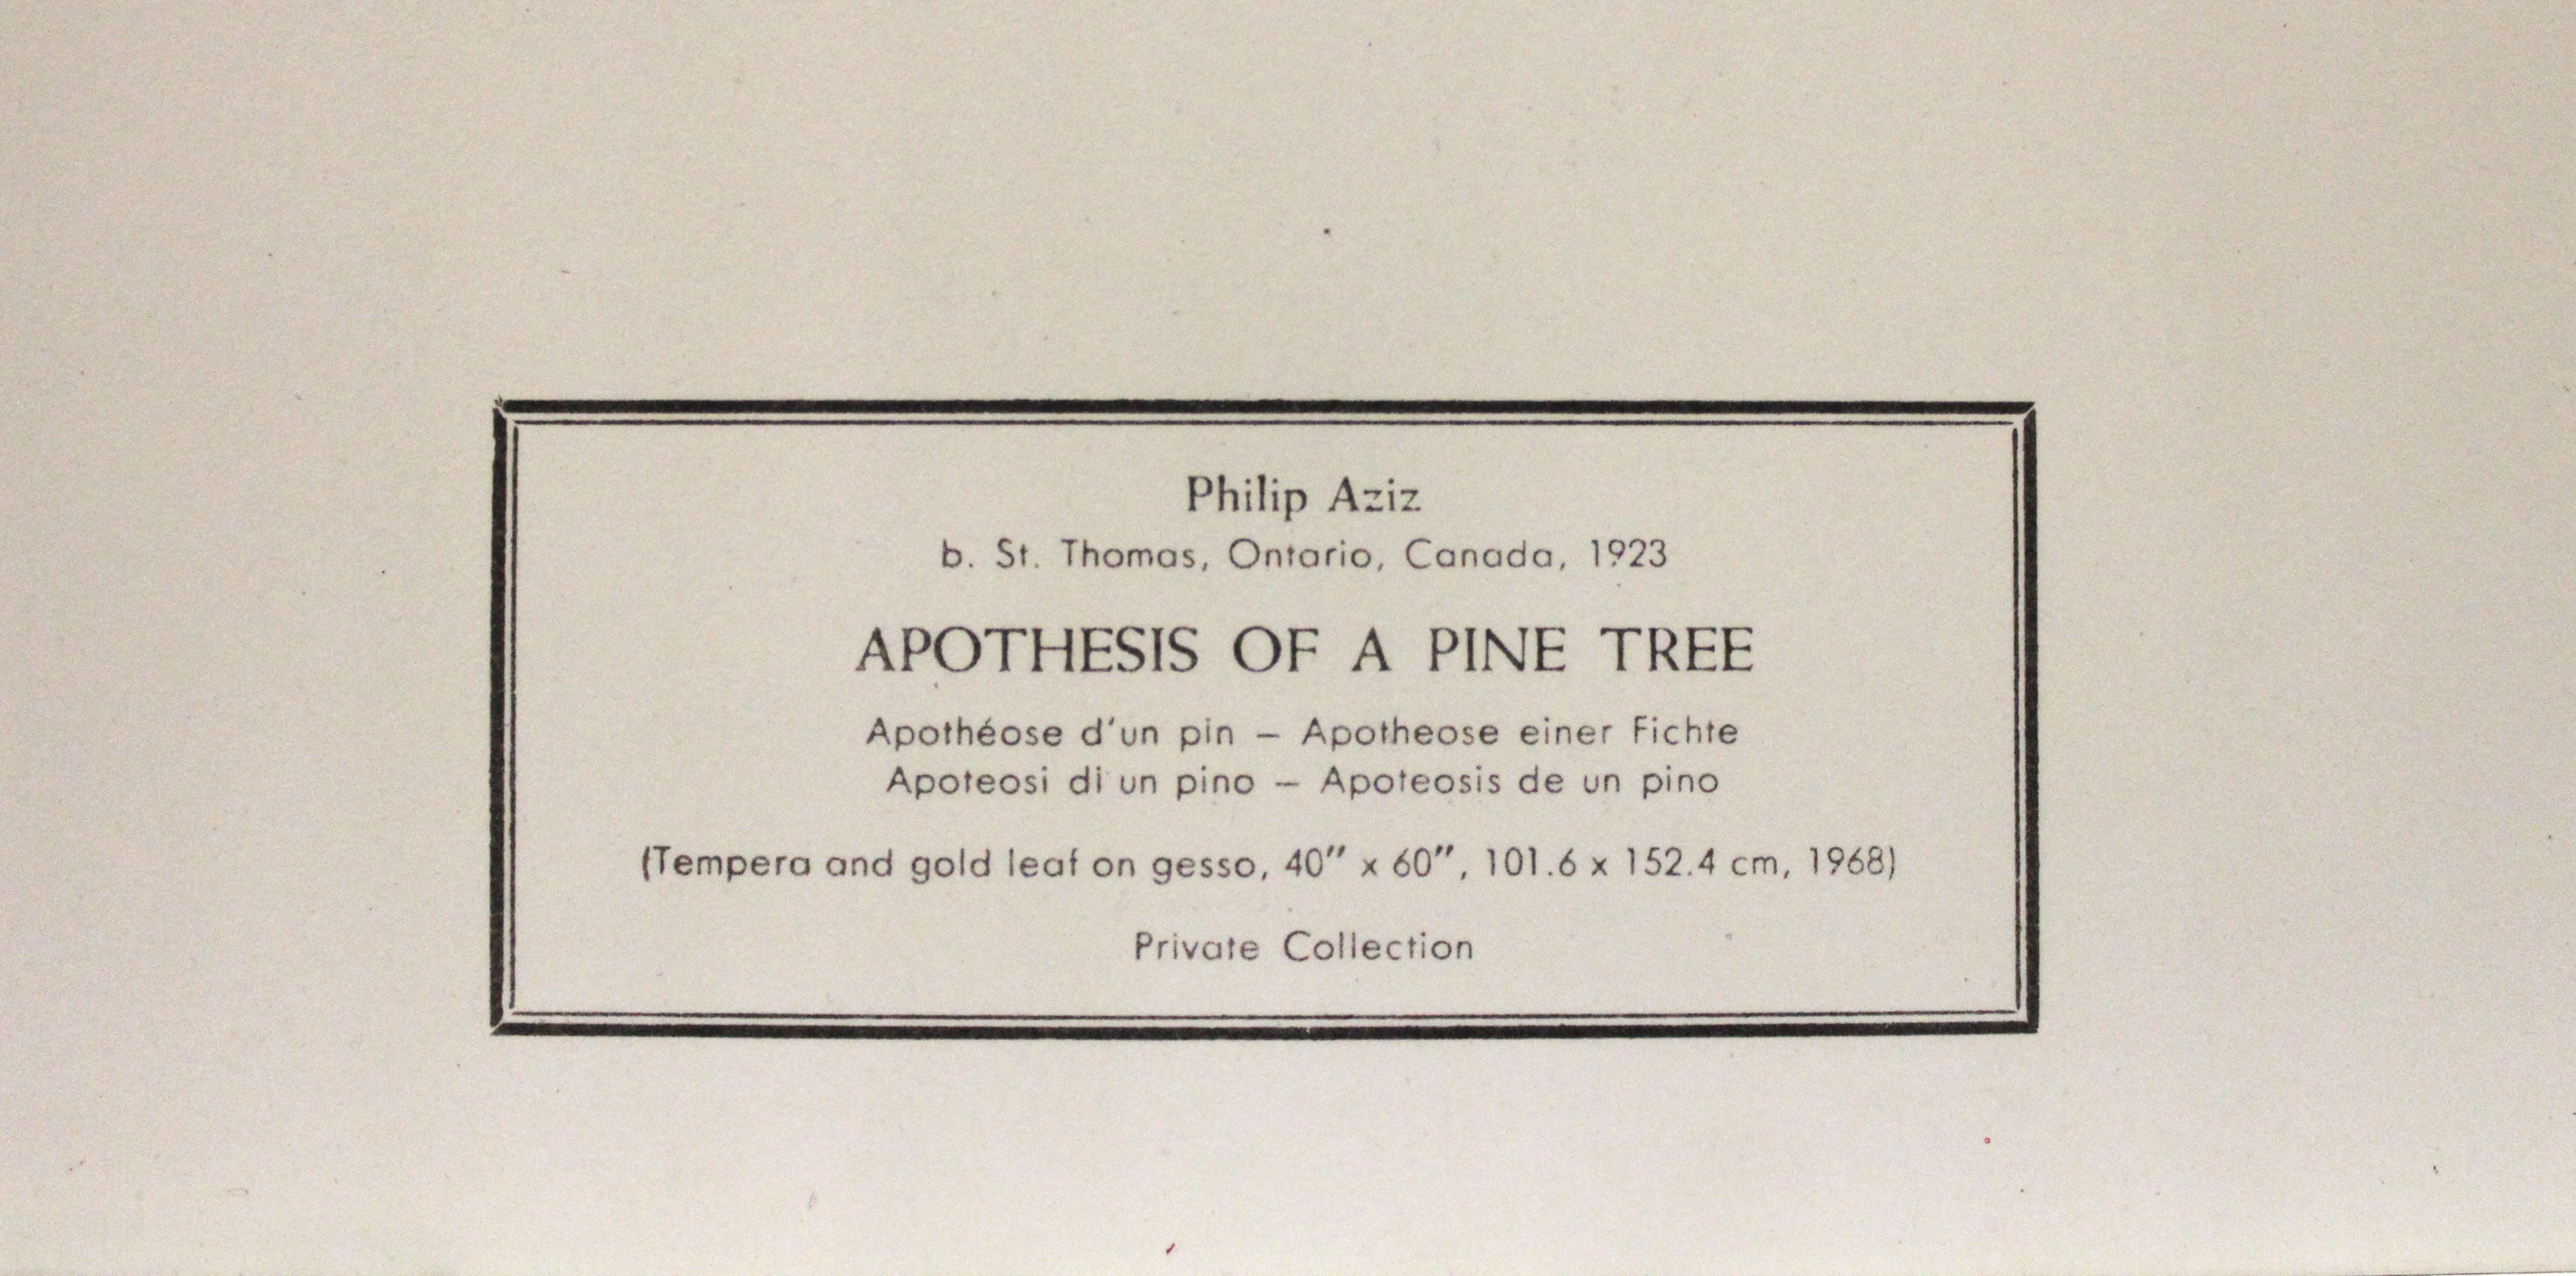 Apothesis of a Pine Tree-Poster. New York Graphic Society - Print by Philip Aziz